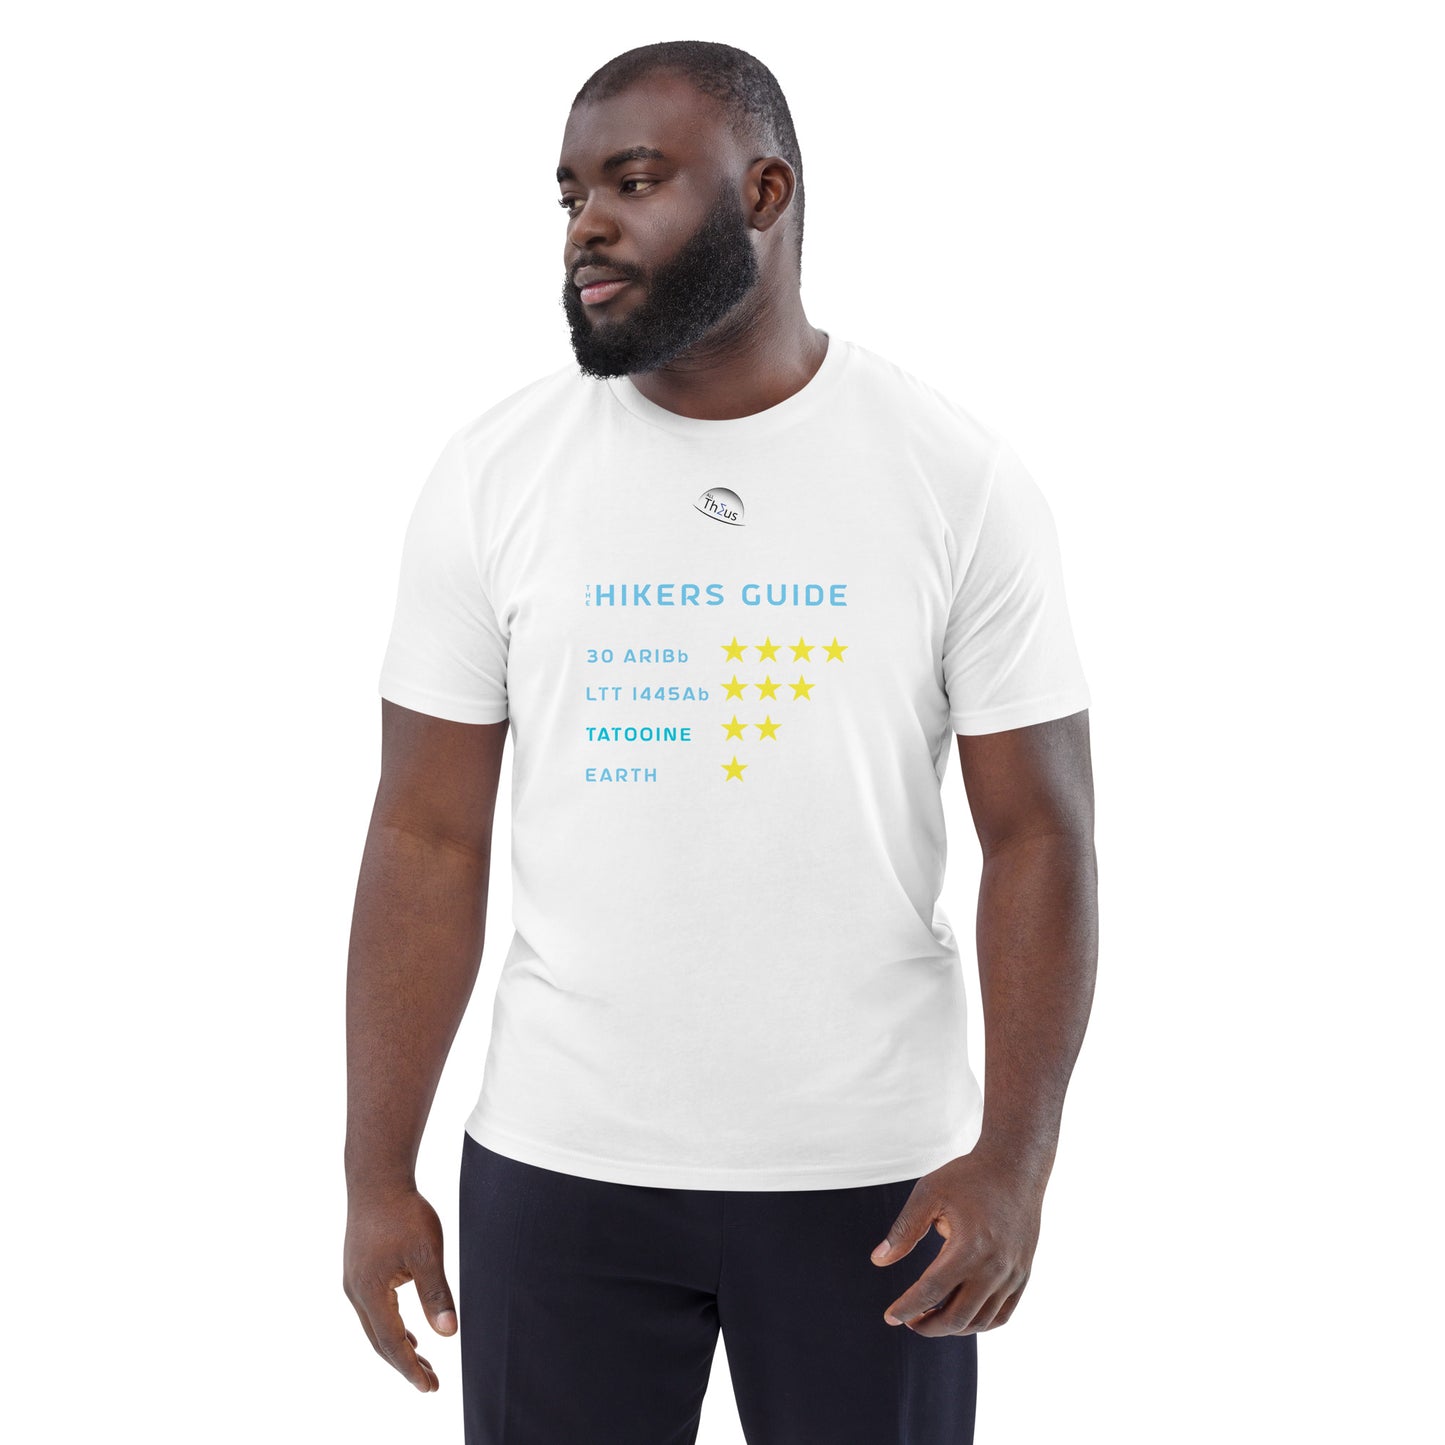 Unisex organic cotton t-shirt - Earth, Only A One Star Planet